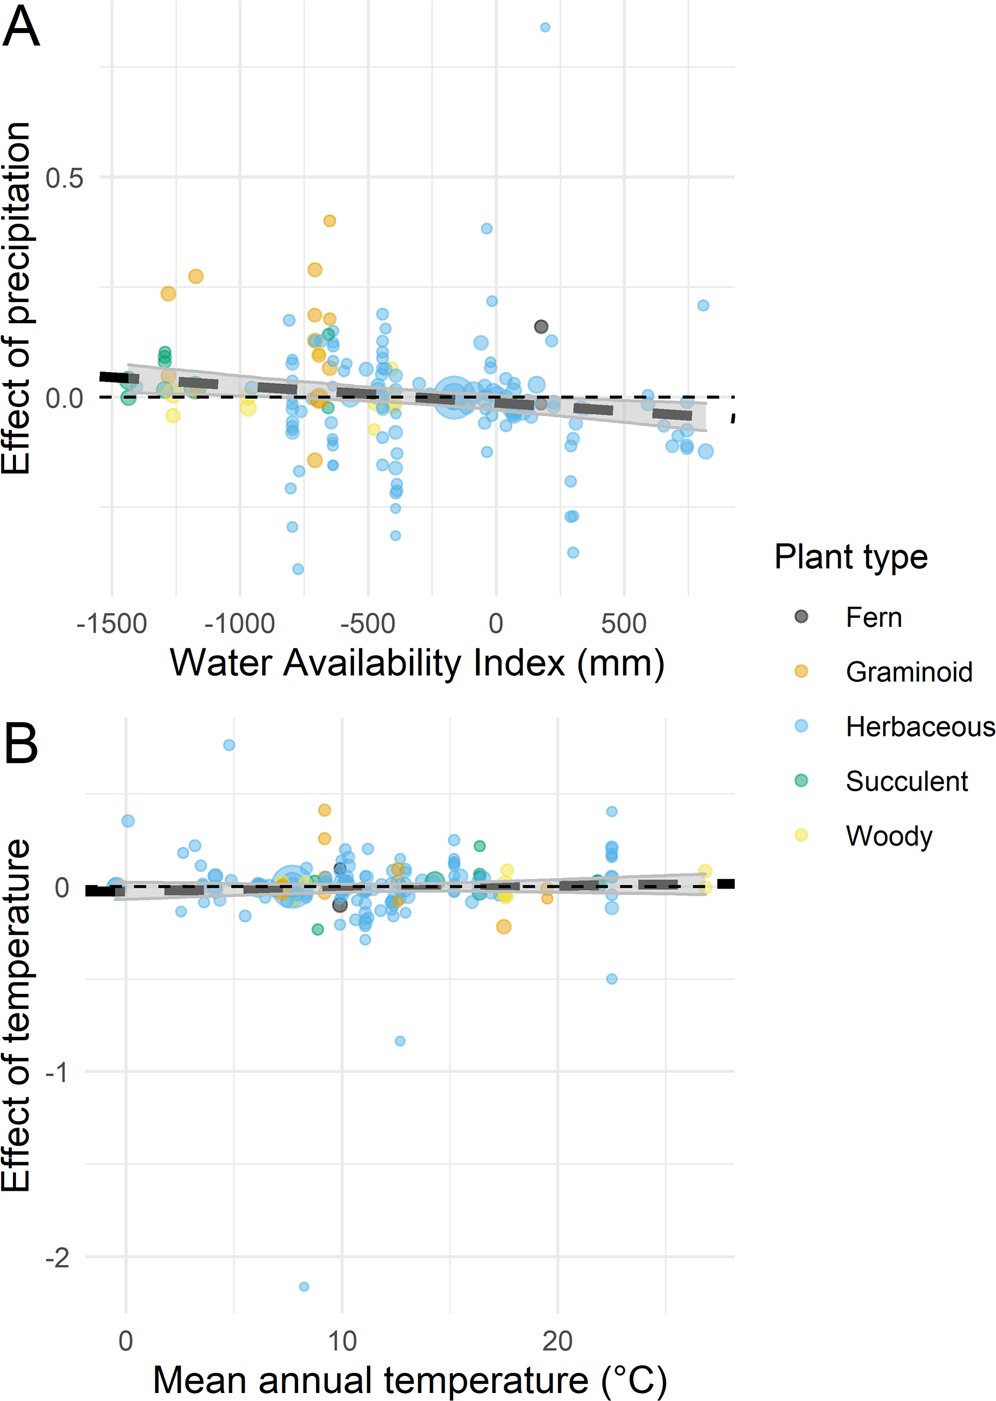 Herbaceous perennial plants with generation time have stronger responses to climate anomalies than those with longer generation time | Nature Communications